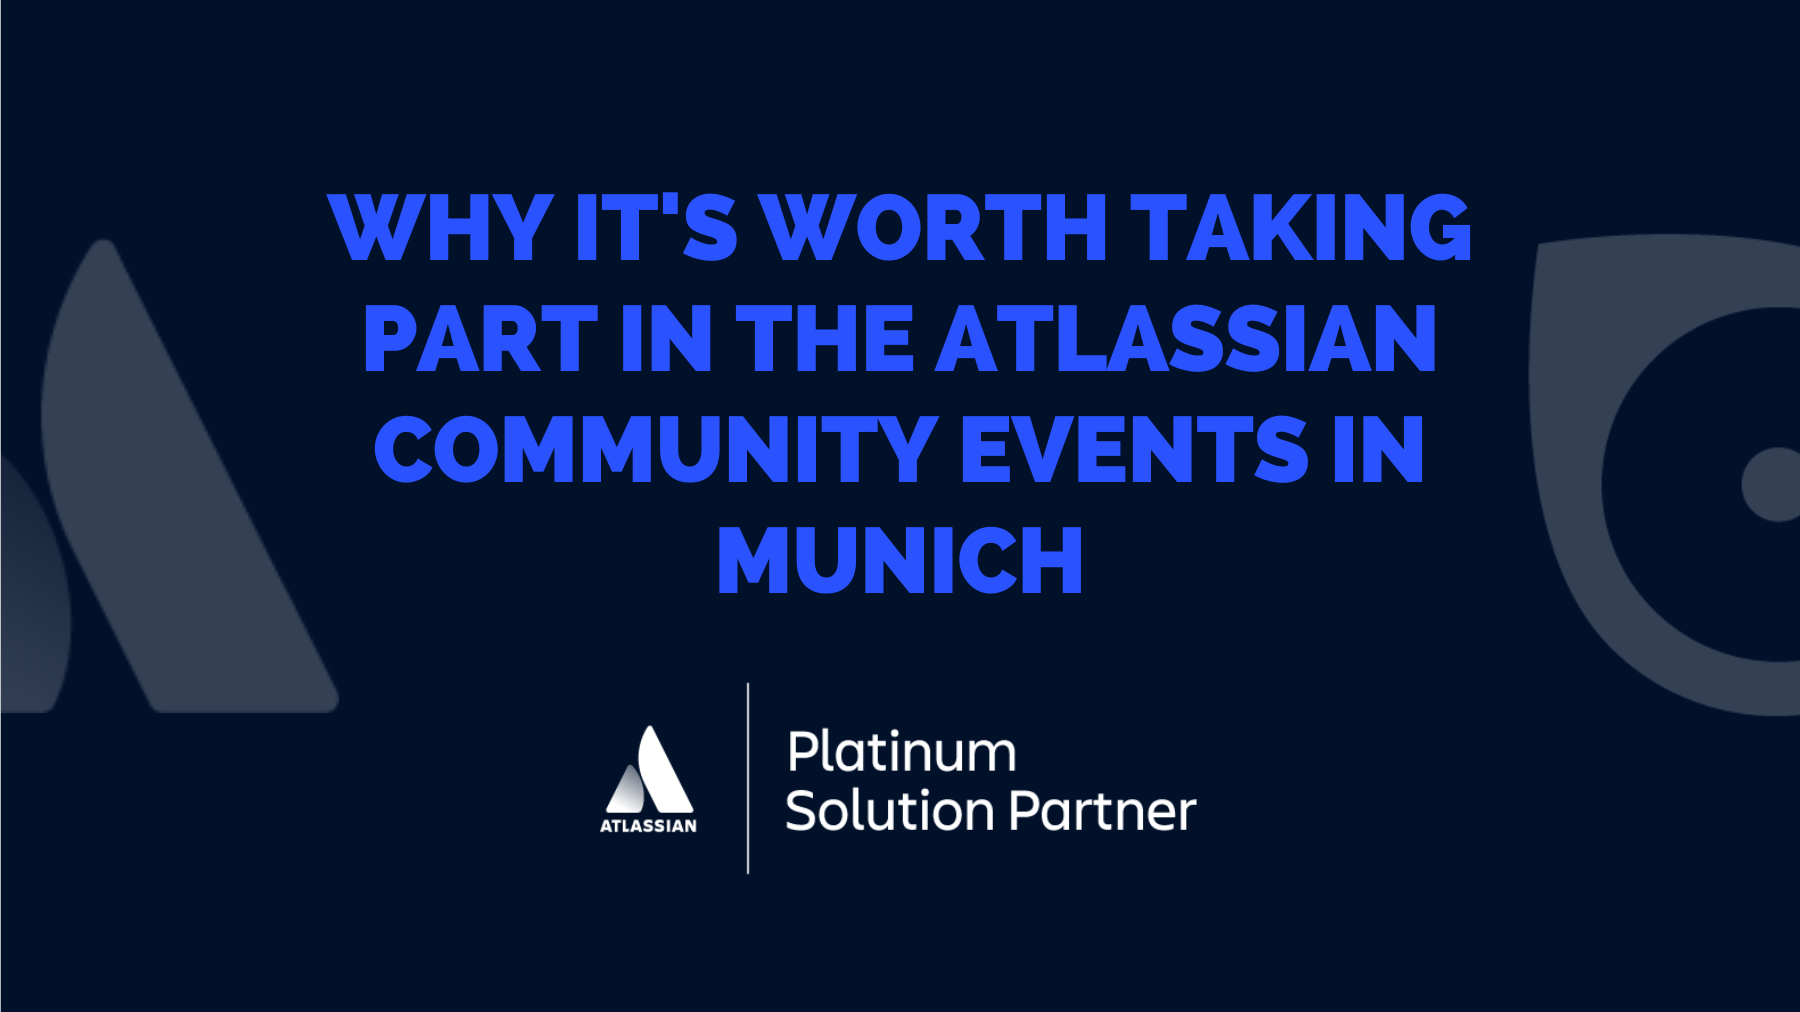 Why it's worth taking part in the Atlassian Community Events in Munich